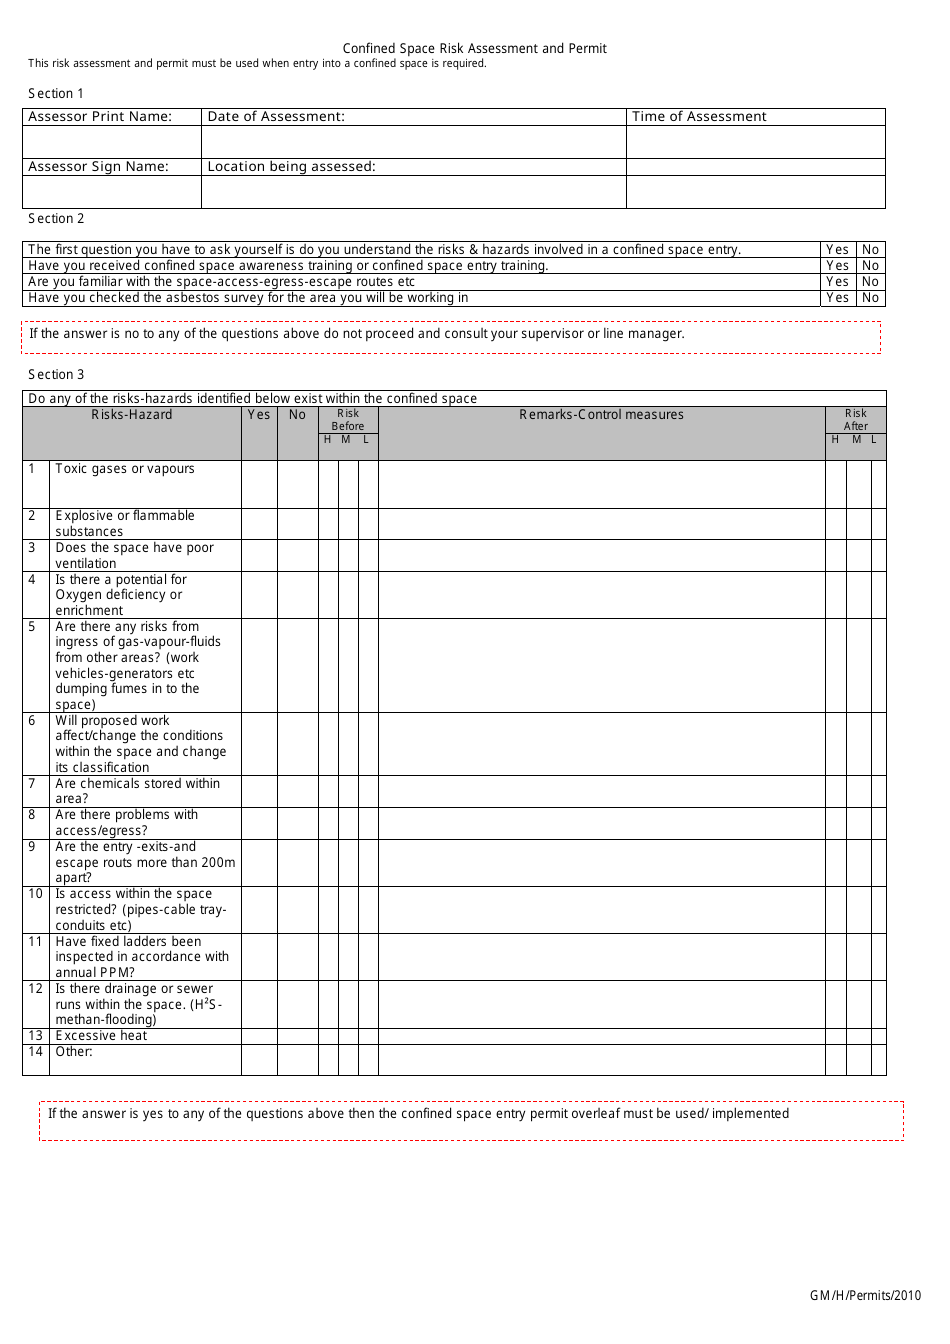 Confined Space Risk Assessment and Permit Form Fill Out, Sign Online